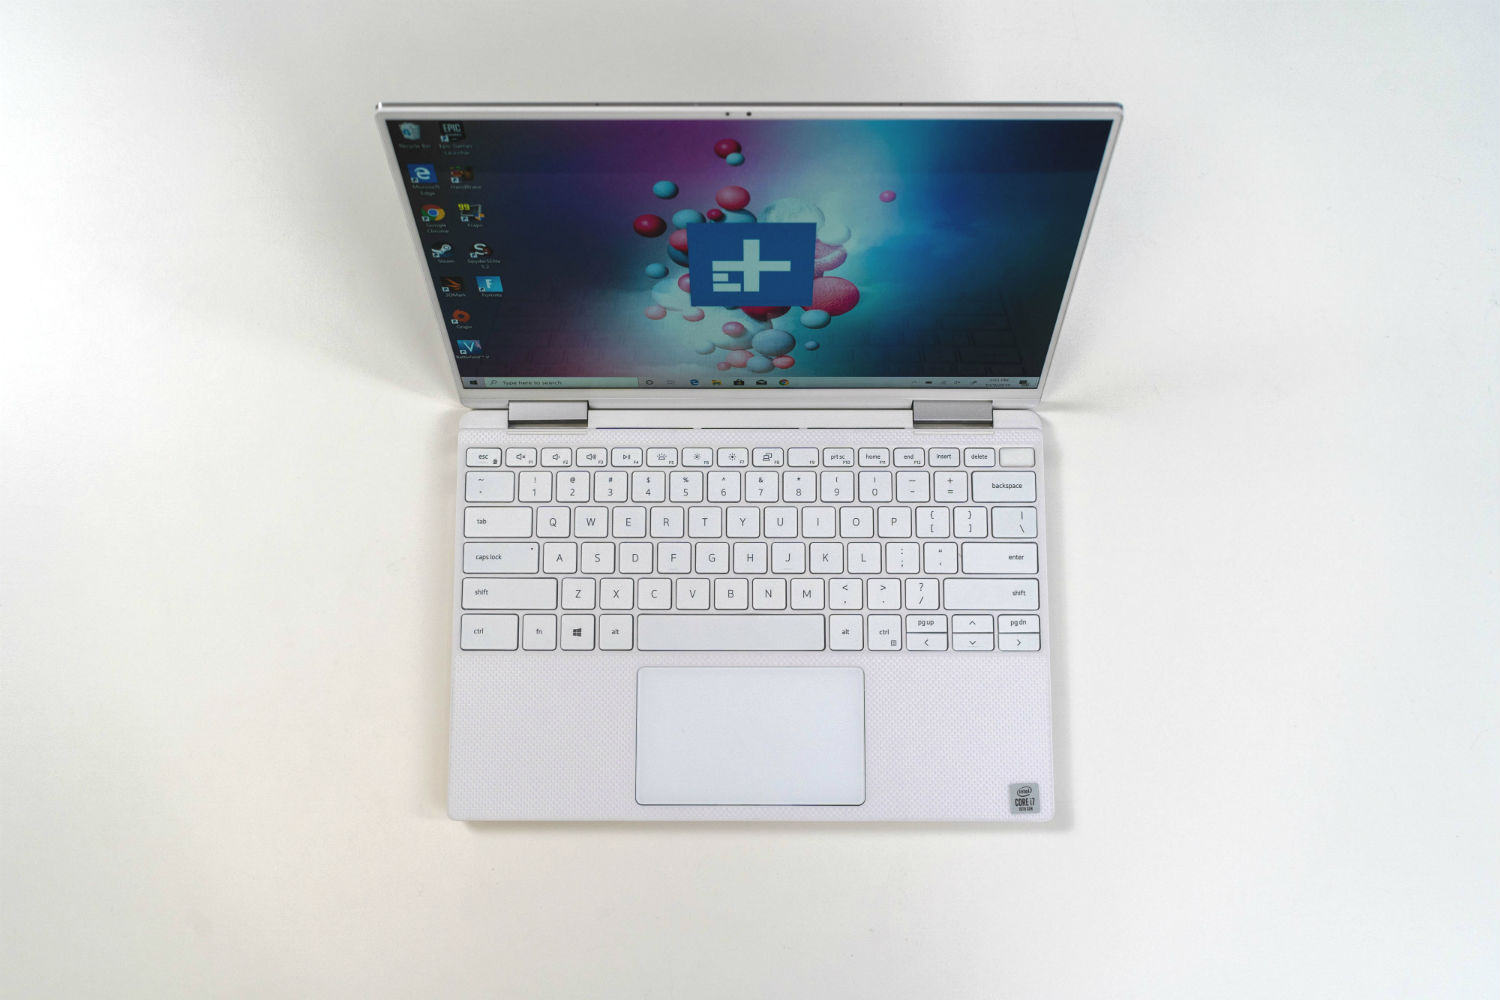 Dell XPS 13 2-in-1 7390 Review (2019): The Next Era For XPS